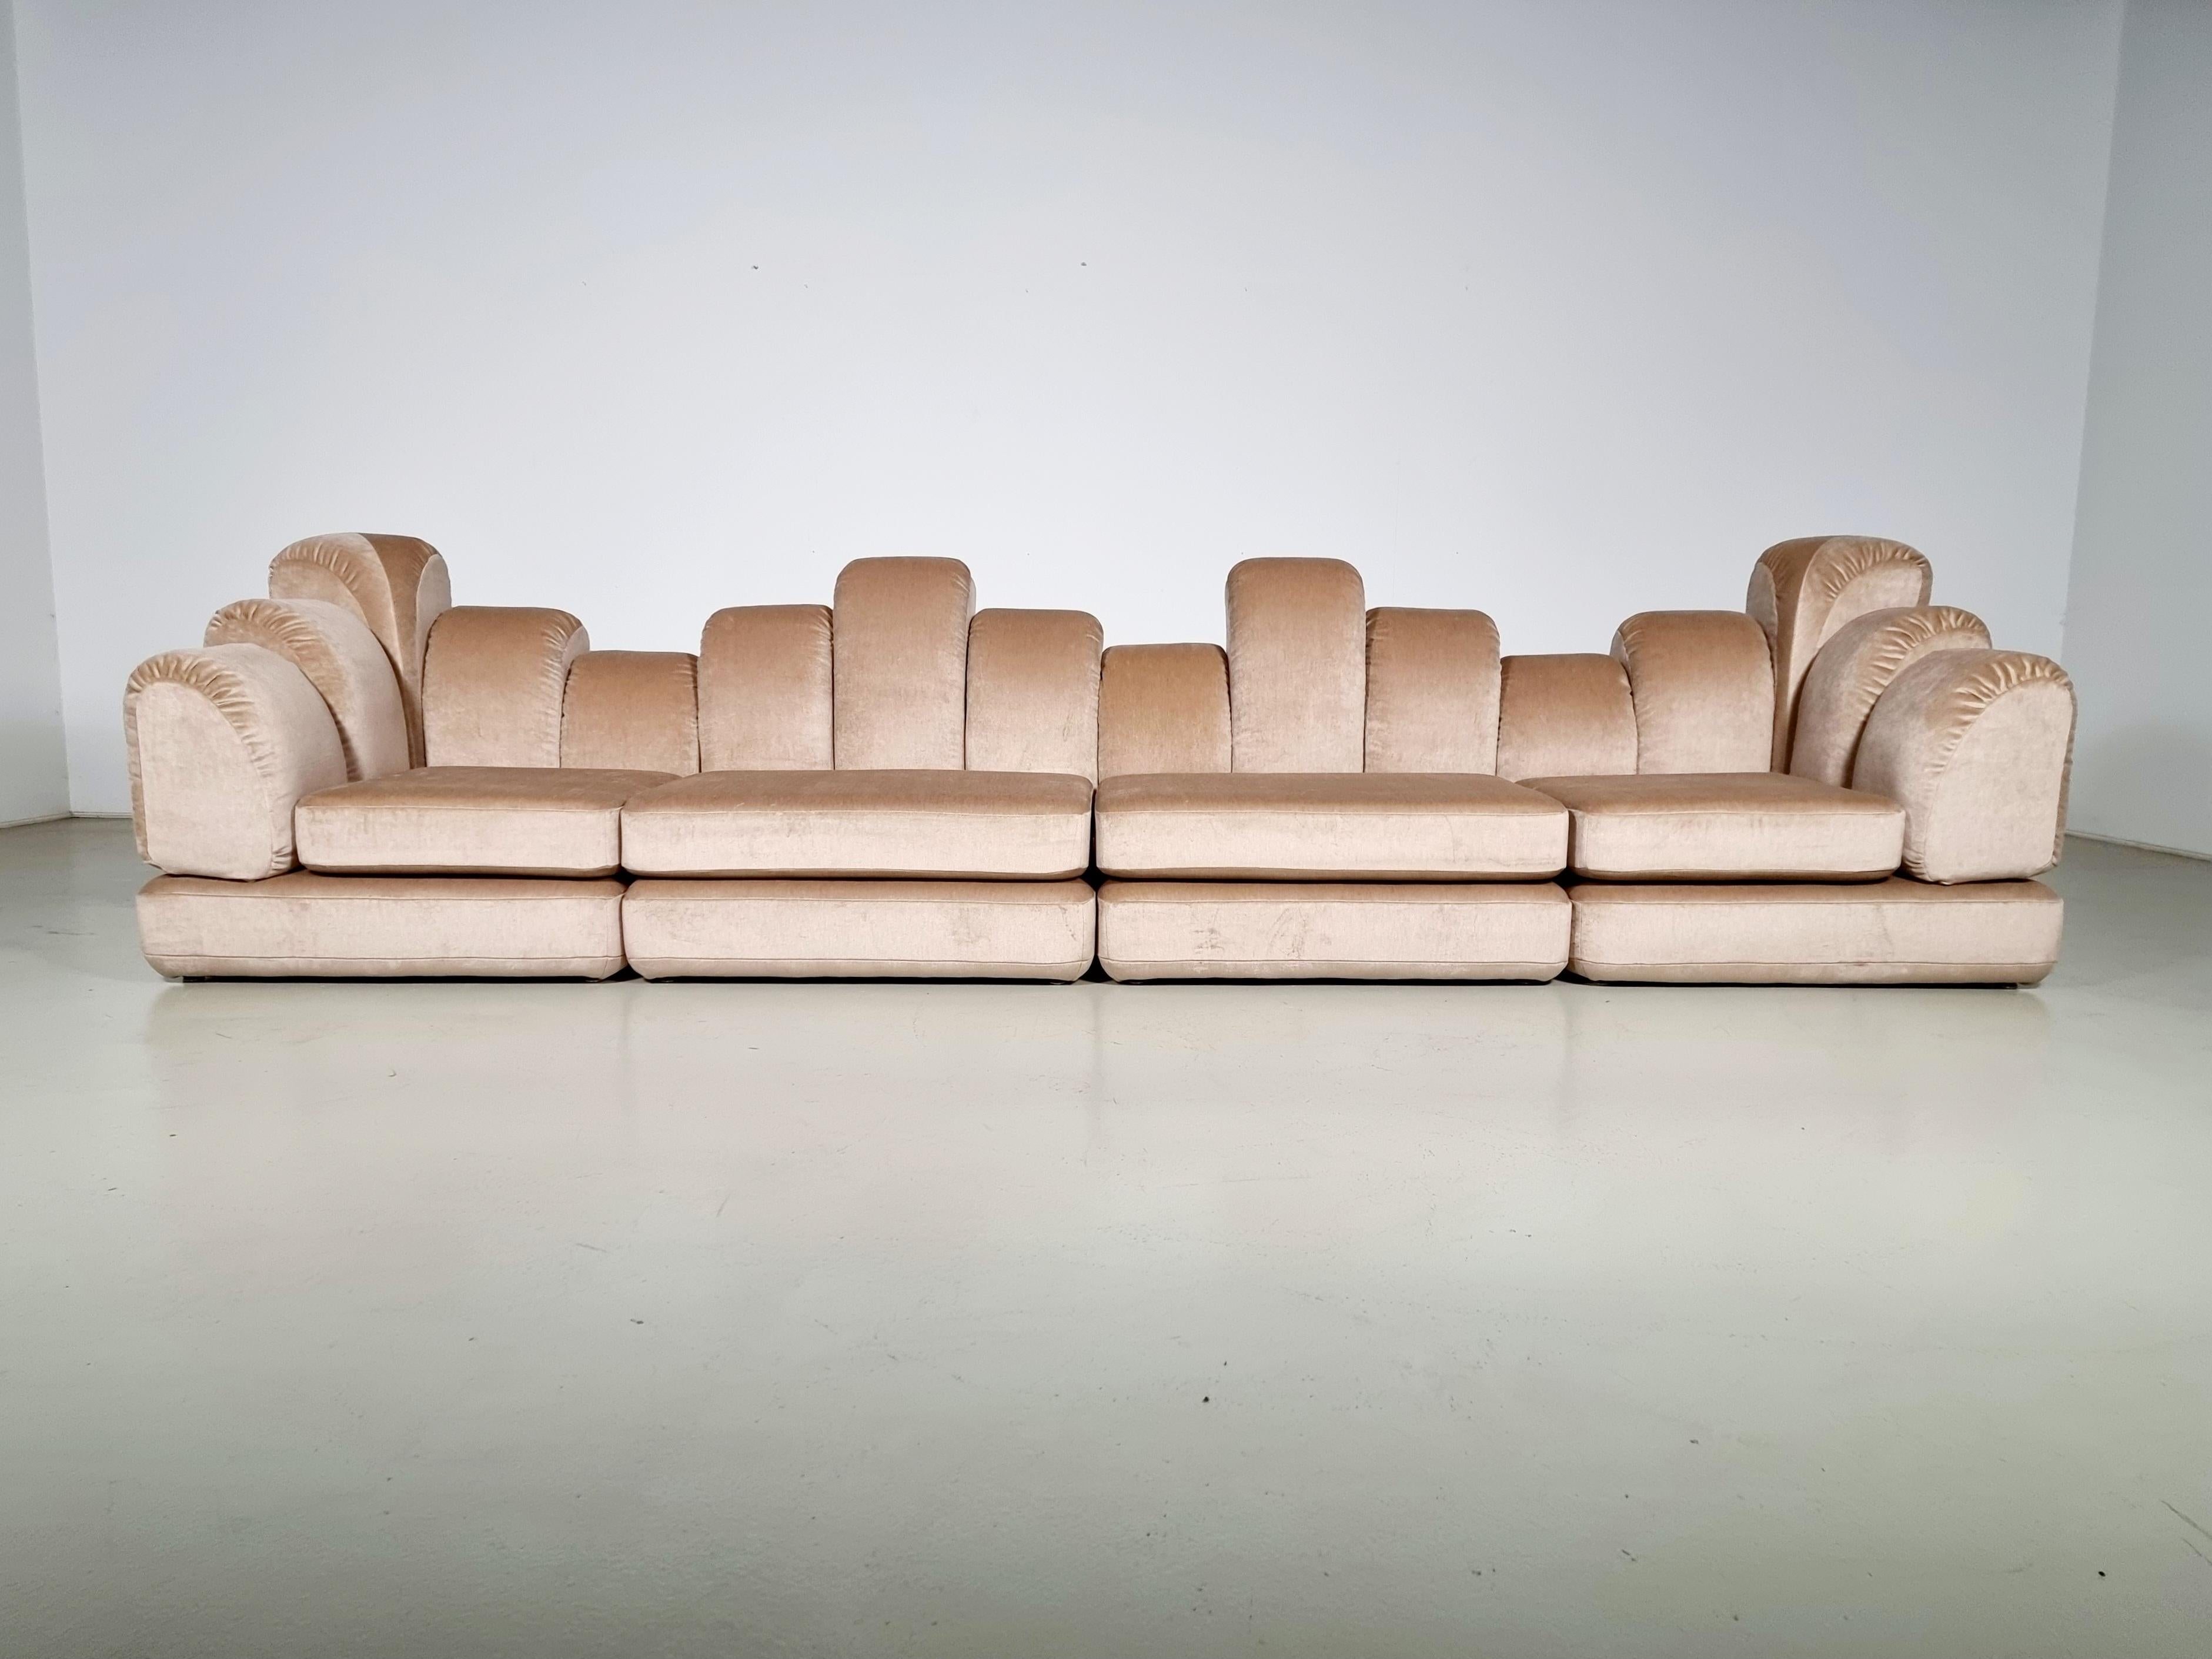 Hans Hopfer 'Dromadaire' Sectional Sofa in Mohair wool, Roche Bobois, 1970

Sectional sofa designed by Hans Hopfer and manufactured by Roche Bobois in France circa 1970. A very rare and collectible modular couch, reupholstered in mohair wool, with a